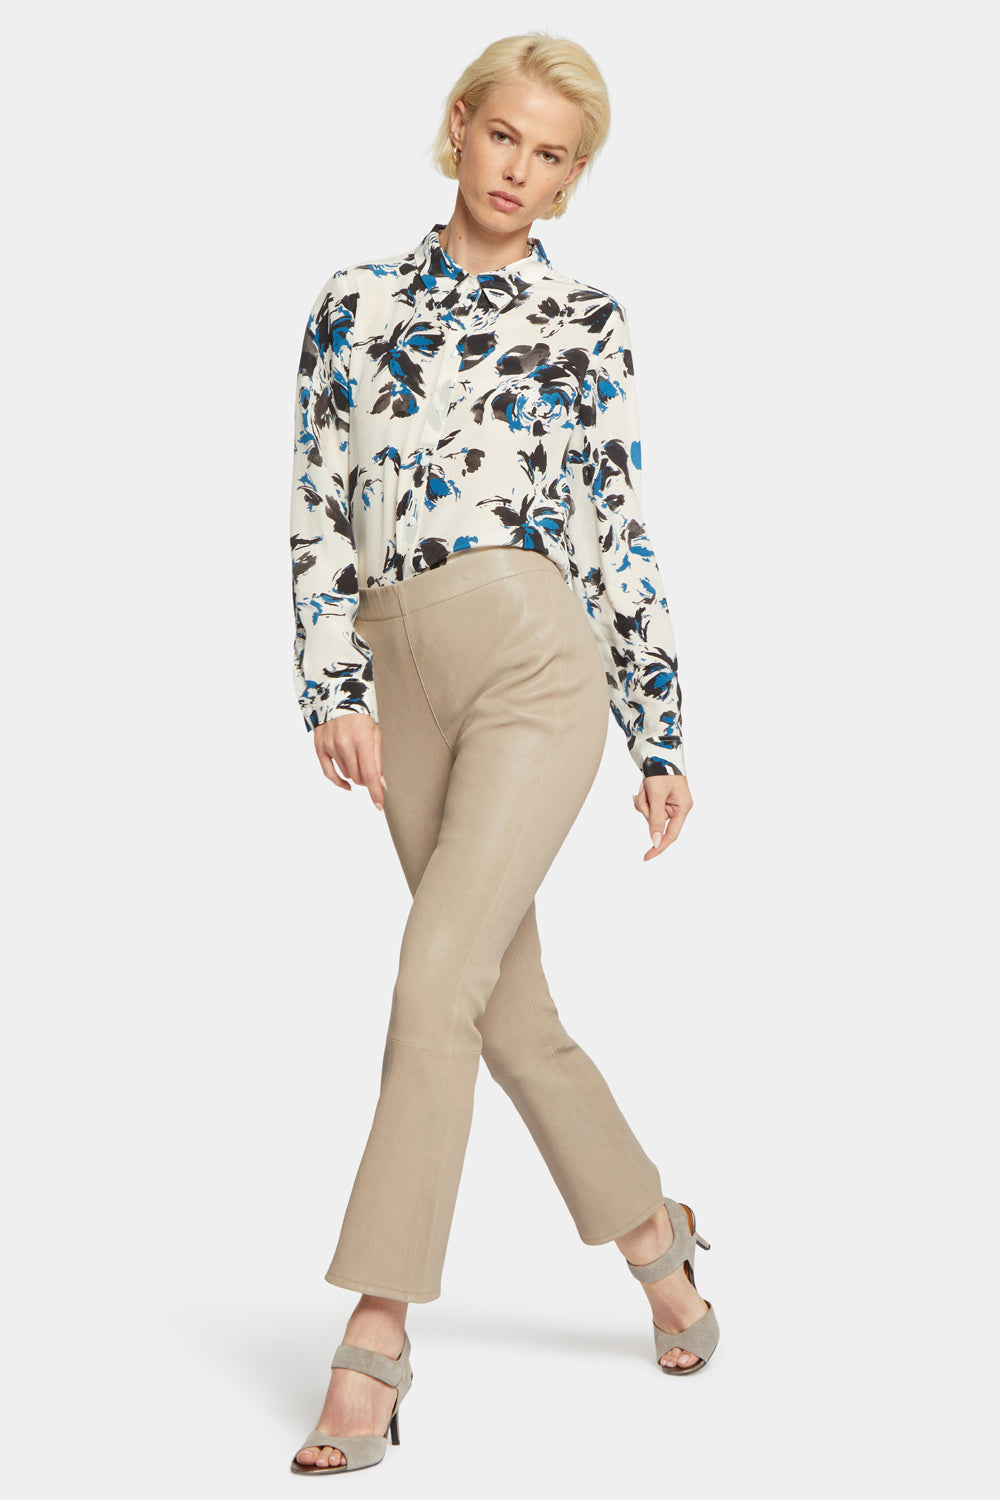 Fabulously Slimming Ponte Pull On Slim Ankle Pants - Chico's Off